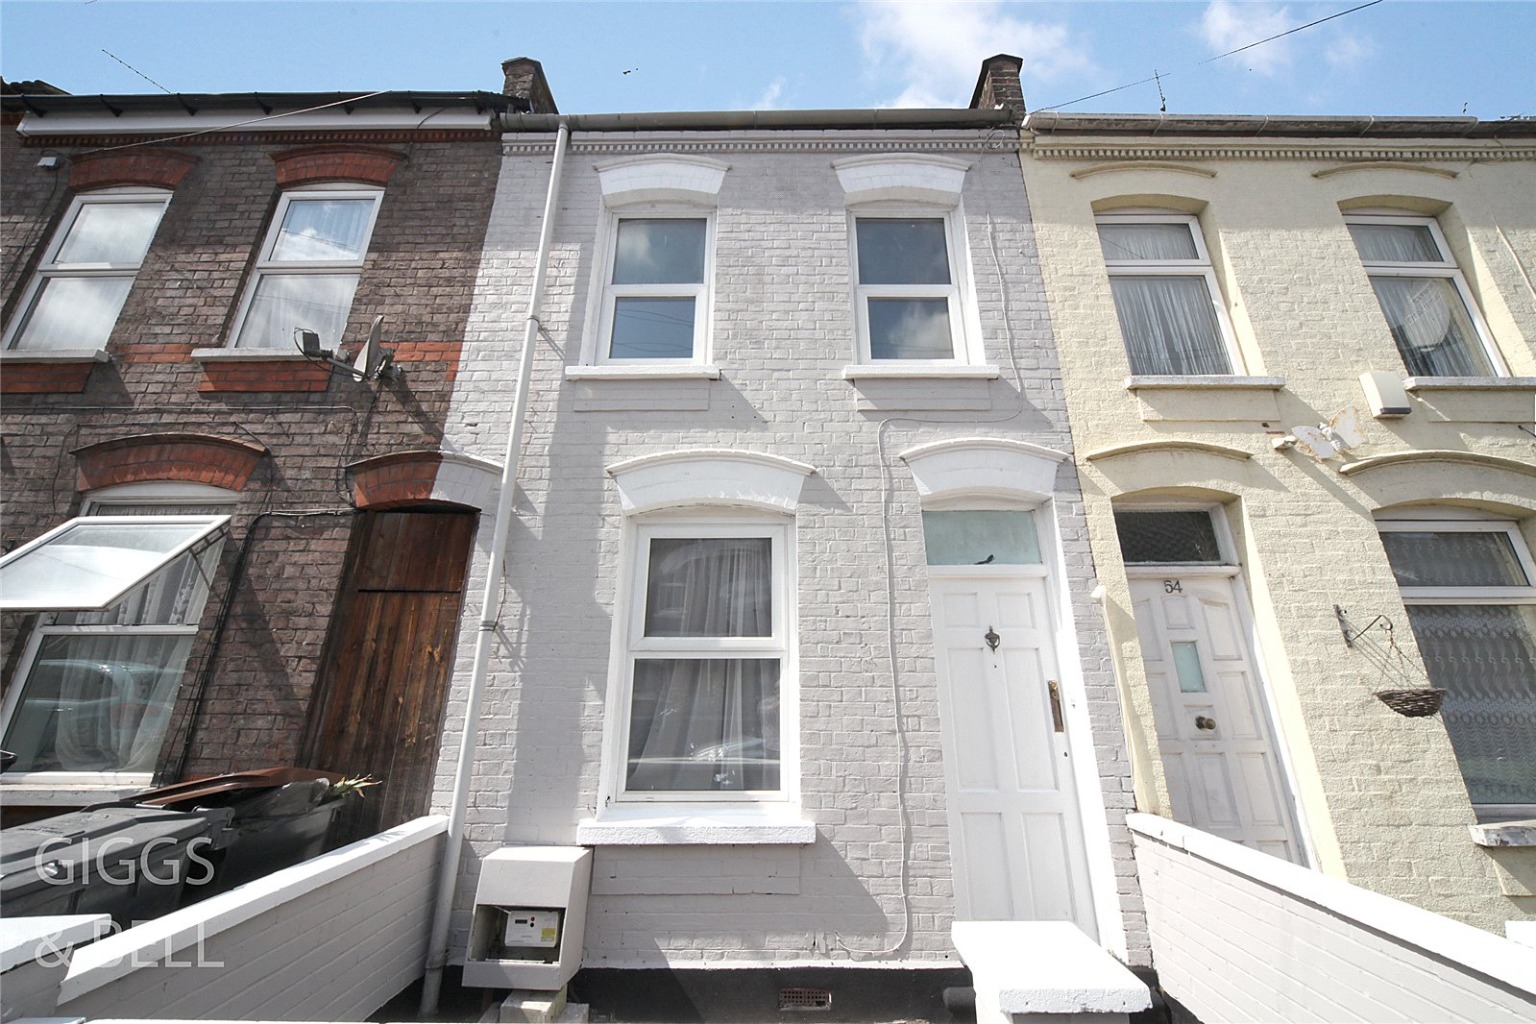 2 bed terraced house for sale in St Peters Road, Luton - Property Image 1